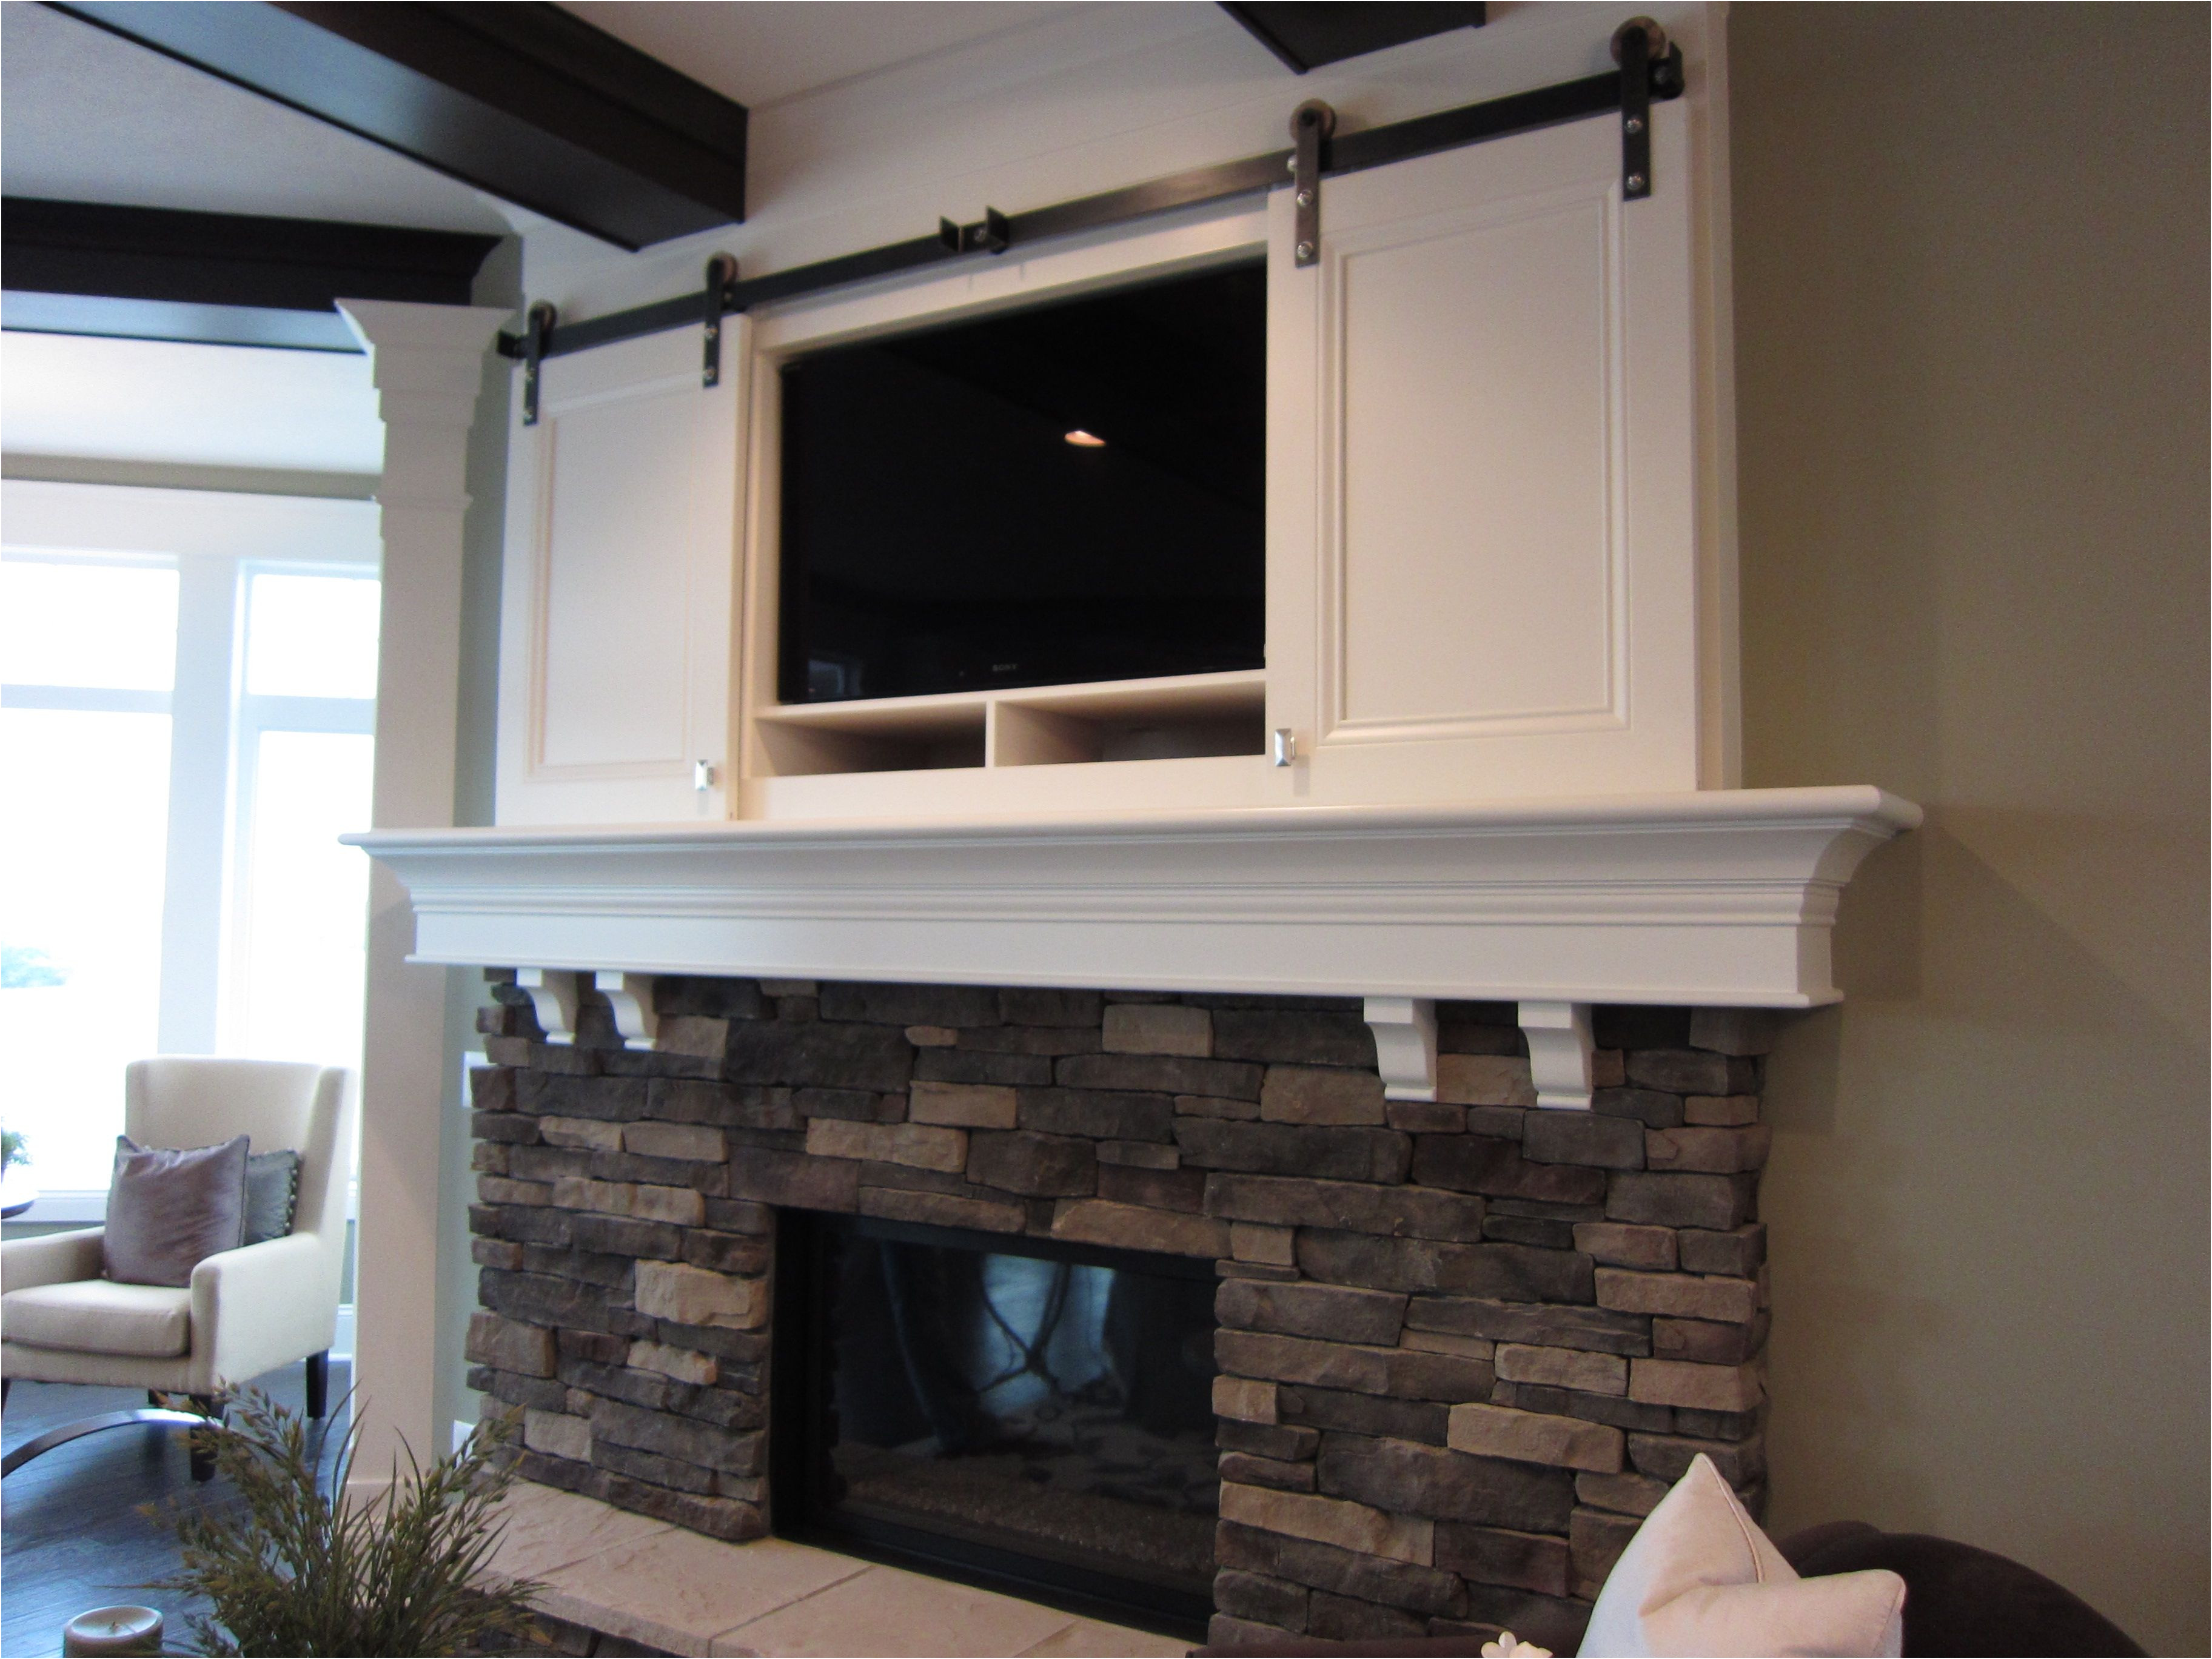 Luxury Gas Fireplace Ideas with Tv Above